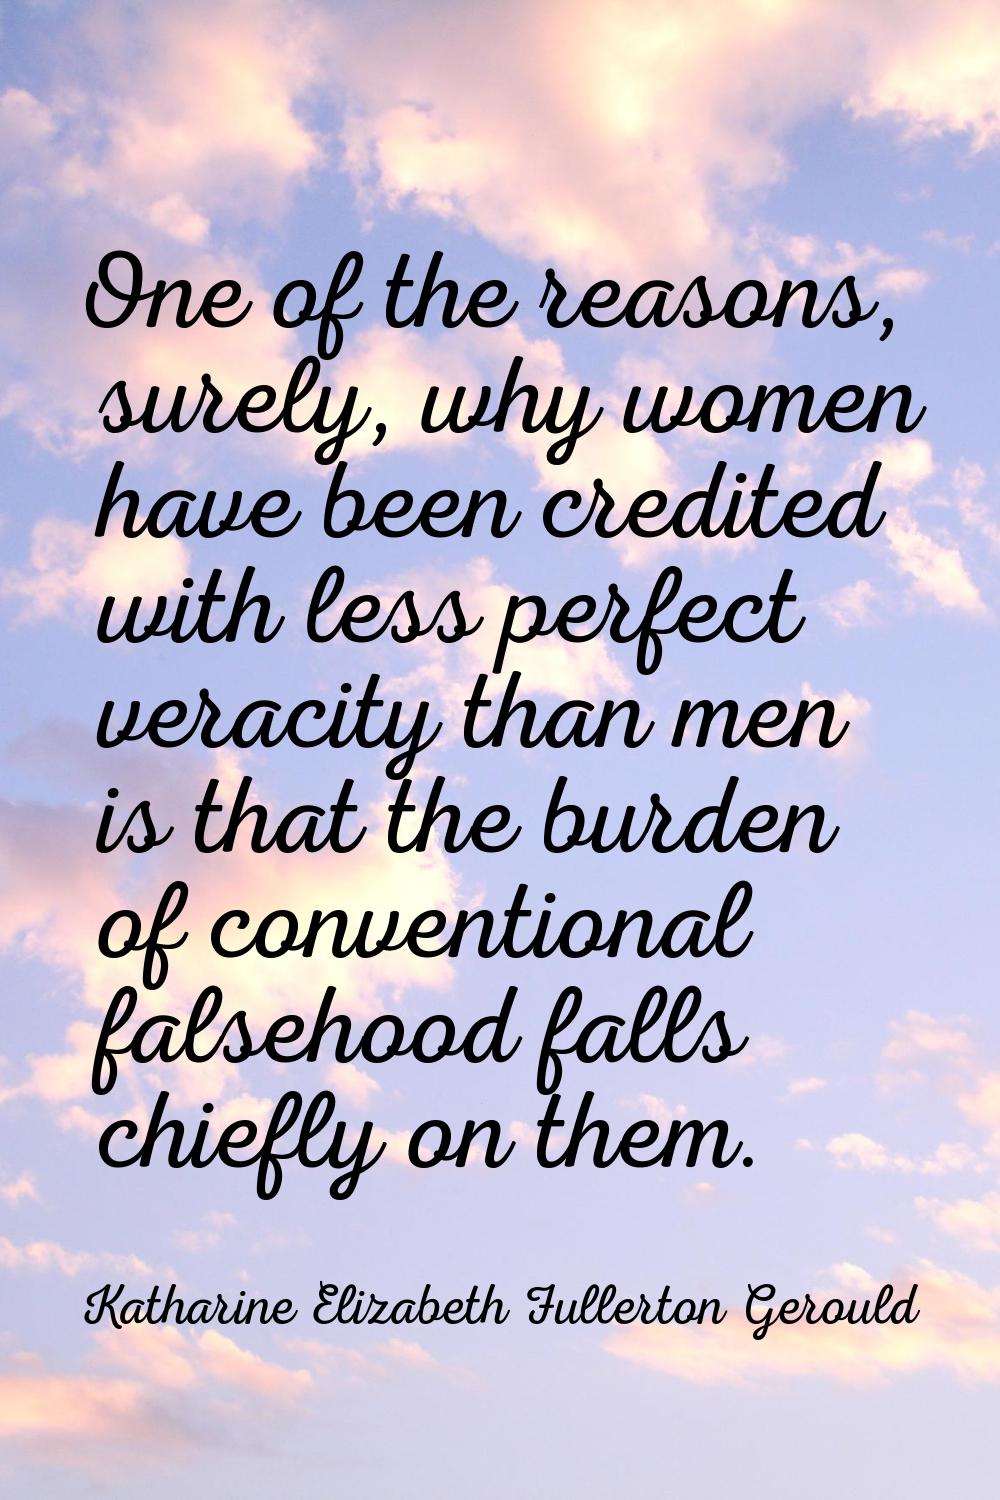 One of the reasons, surely, why women have been credited with less perfect veracity than men is tha